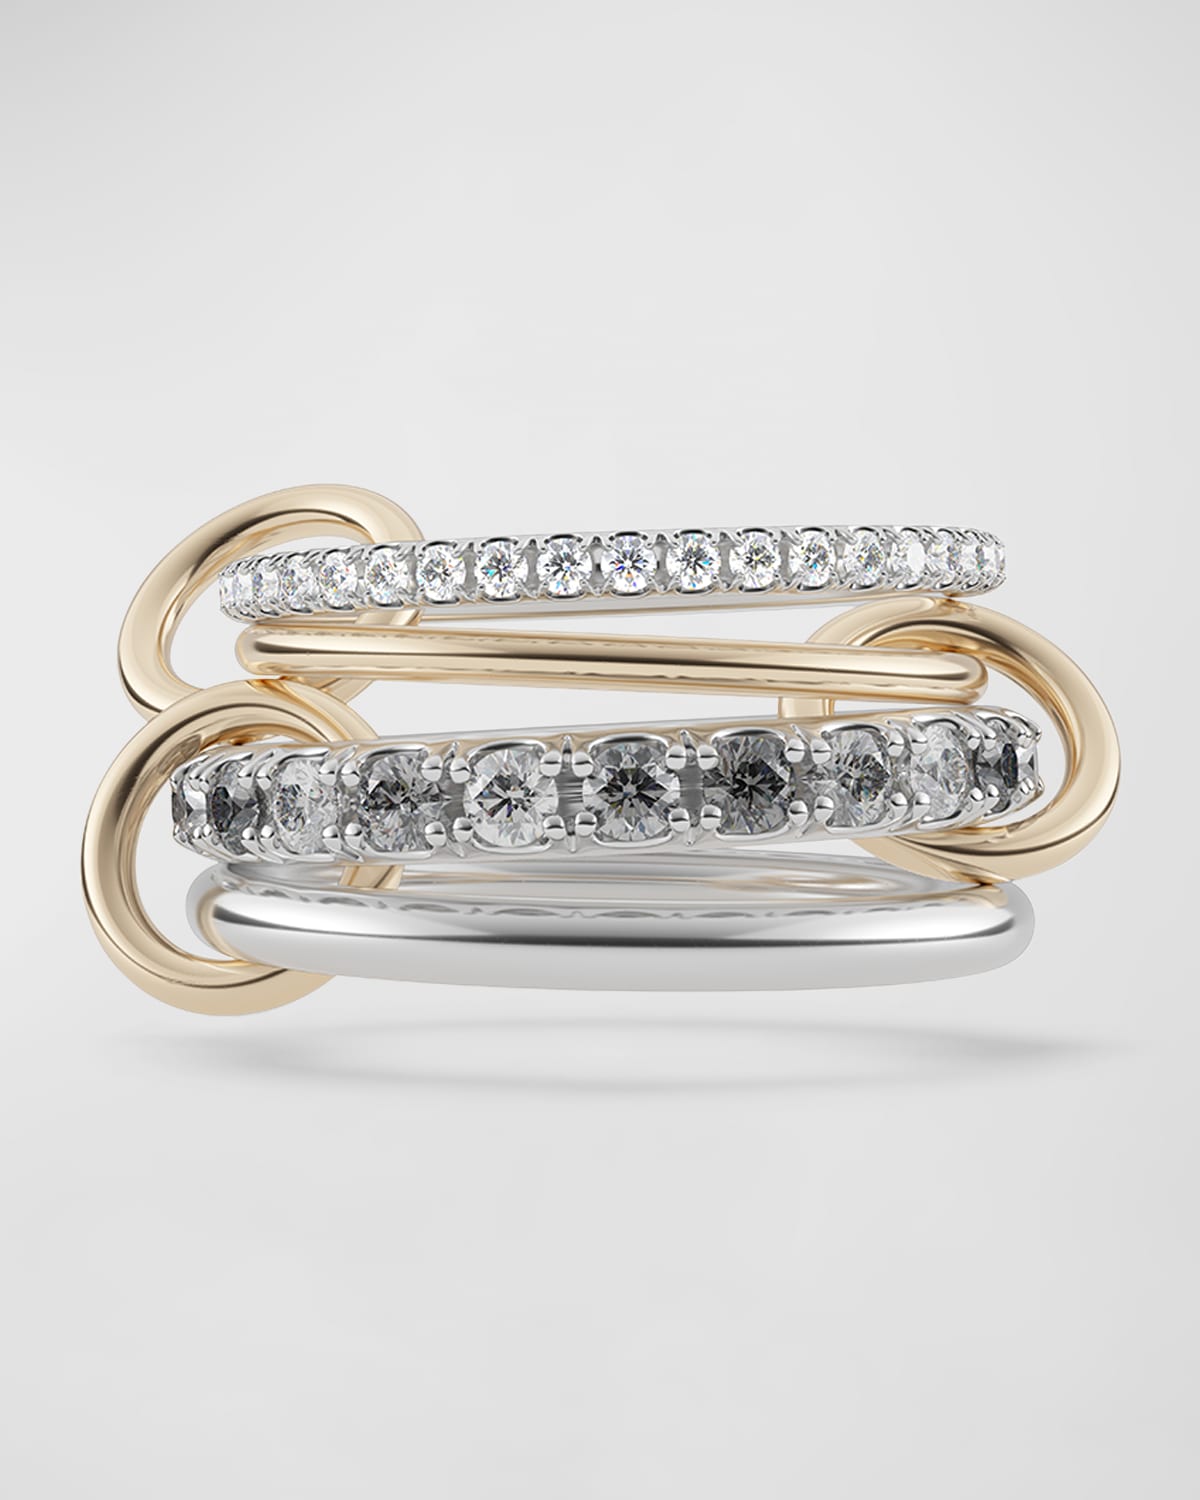 Gold and Silver 4-Band Ring with Diamonds